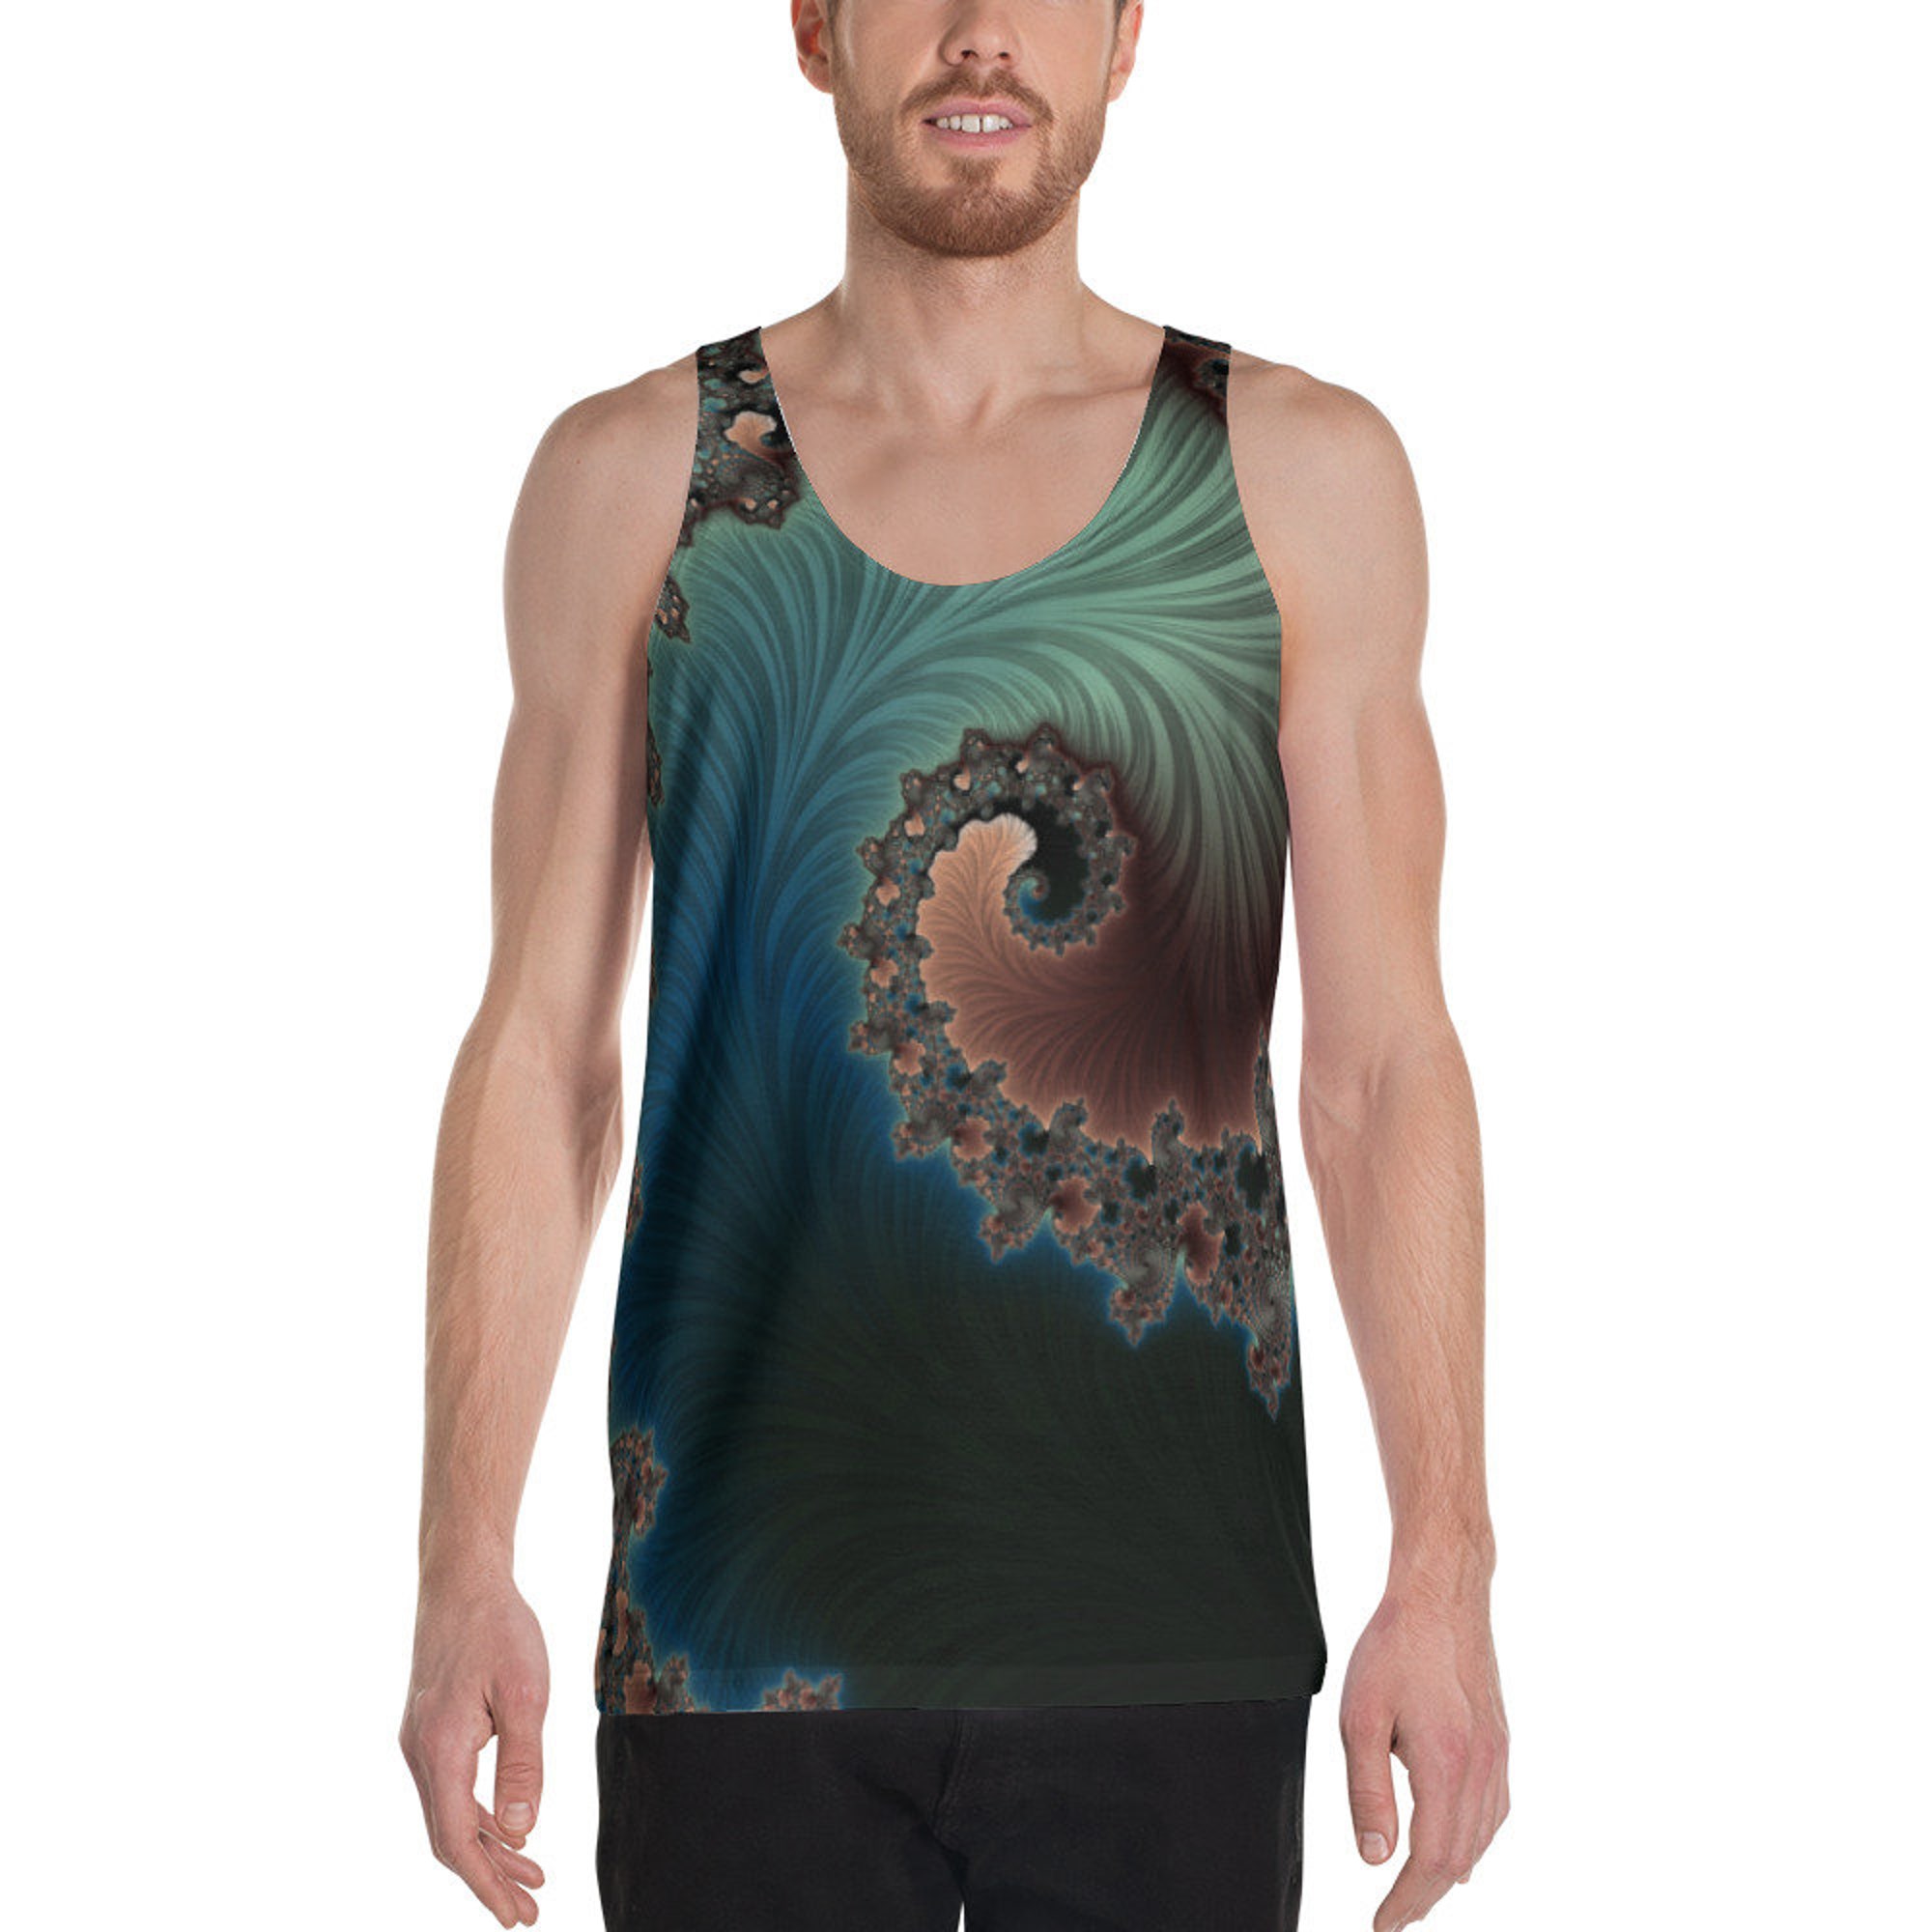 Discover Navy Blue and Mint Green Men's Tank Top, Sacred Geometry Fractal Festival Clothing